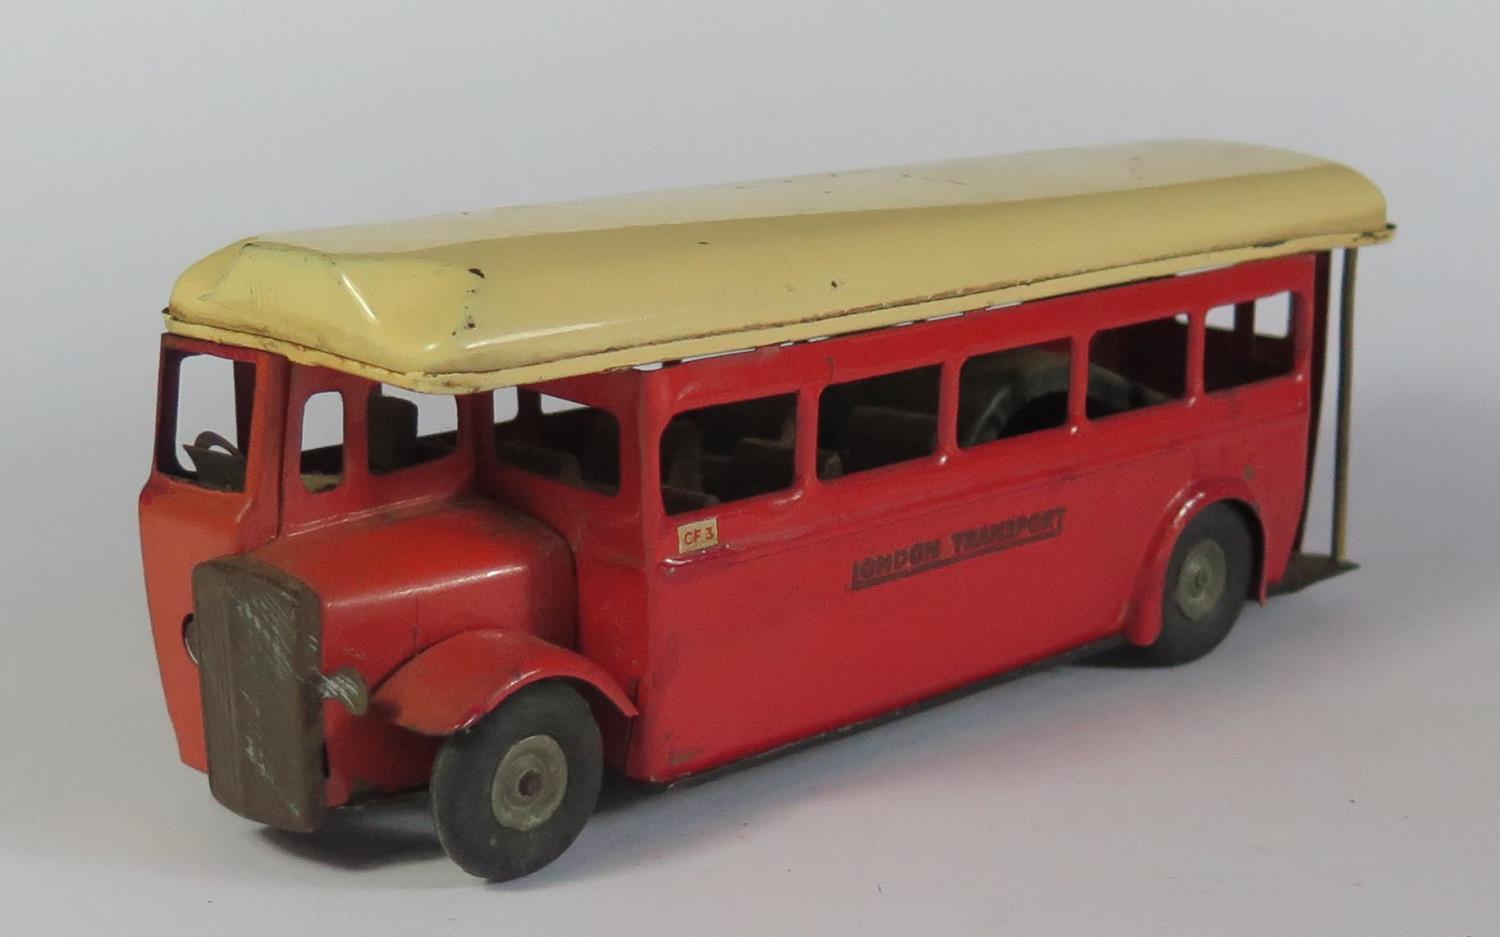 Triang Minic "Push 'n Go" Single Deck Bus in red/cream.